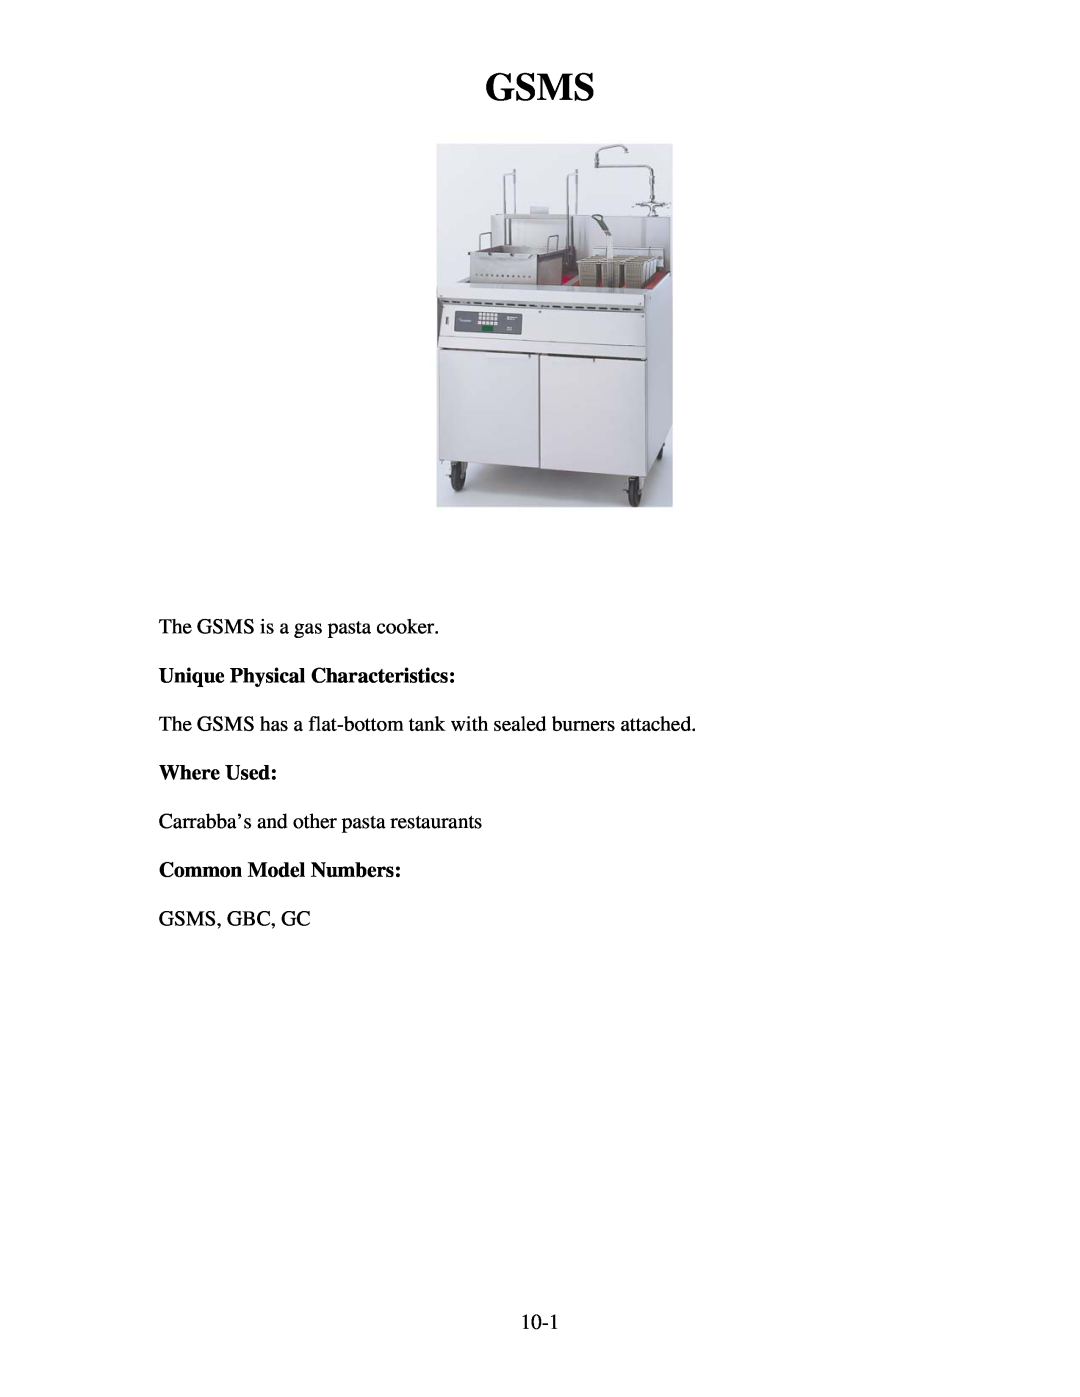 Frymaster 8196321 manual The GSMS is a gas pasta cooker, Carrabba’s and other pasta restaurants, Gsms, Gbc, Gc, 10-1 